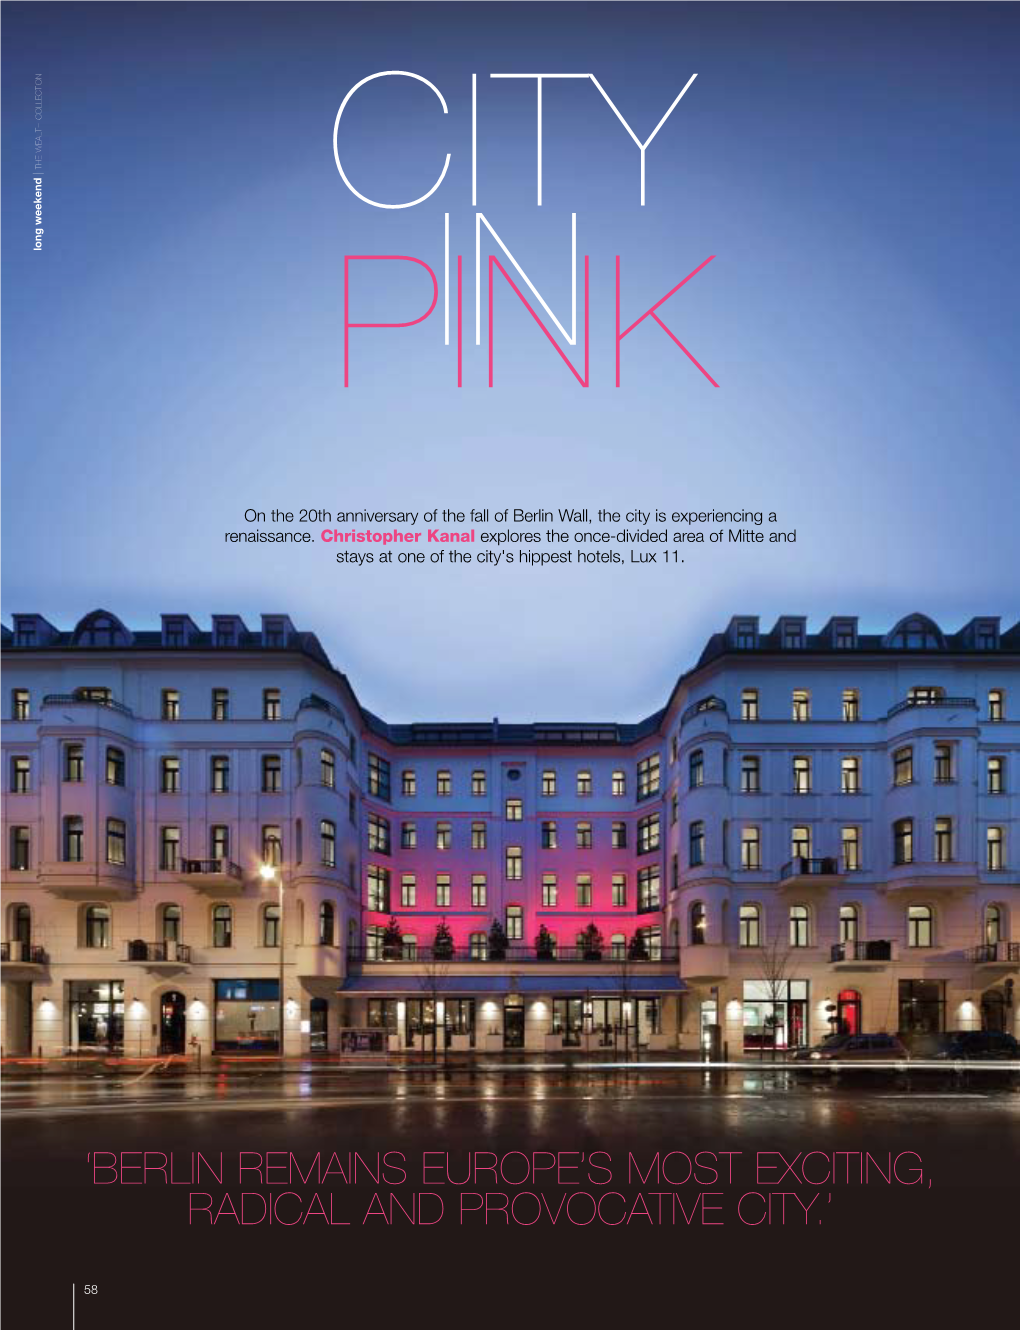 'Berlin Remains Europe's Most Exciting, Radical and Provocative City.'